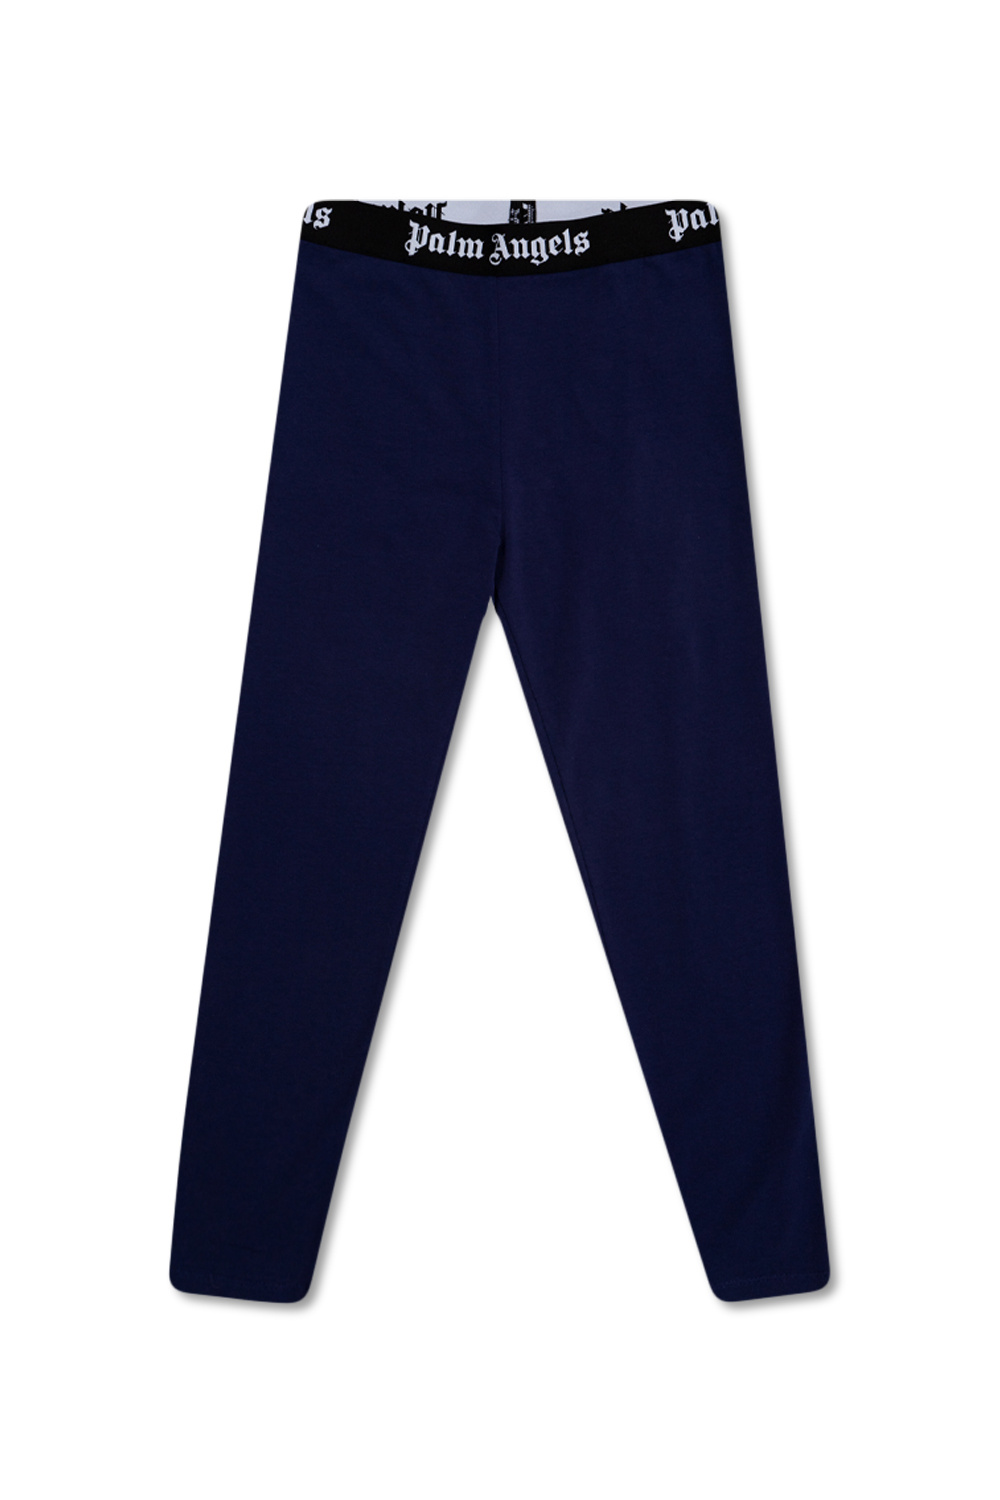 Palm Angels Kids Leggings with logo